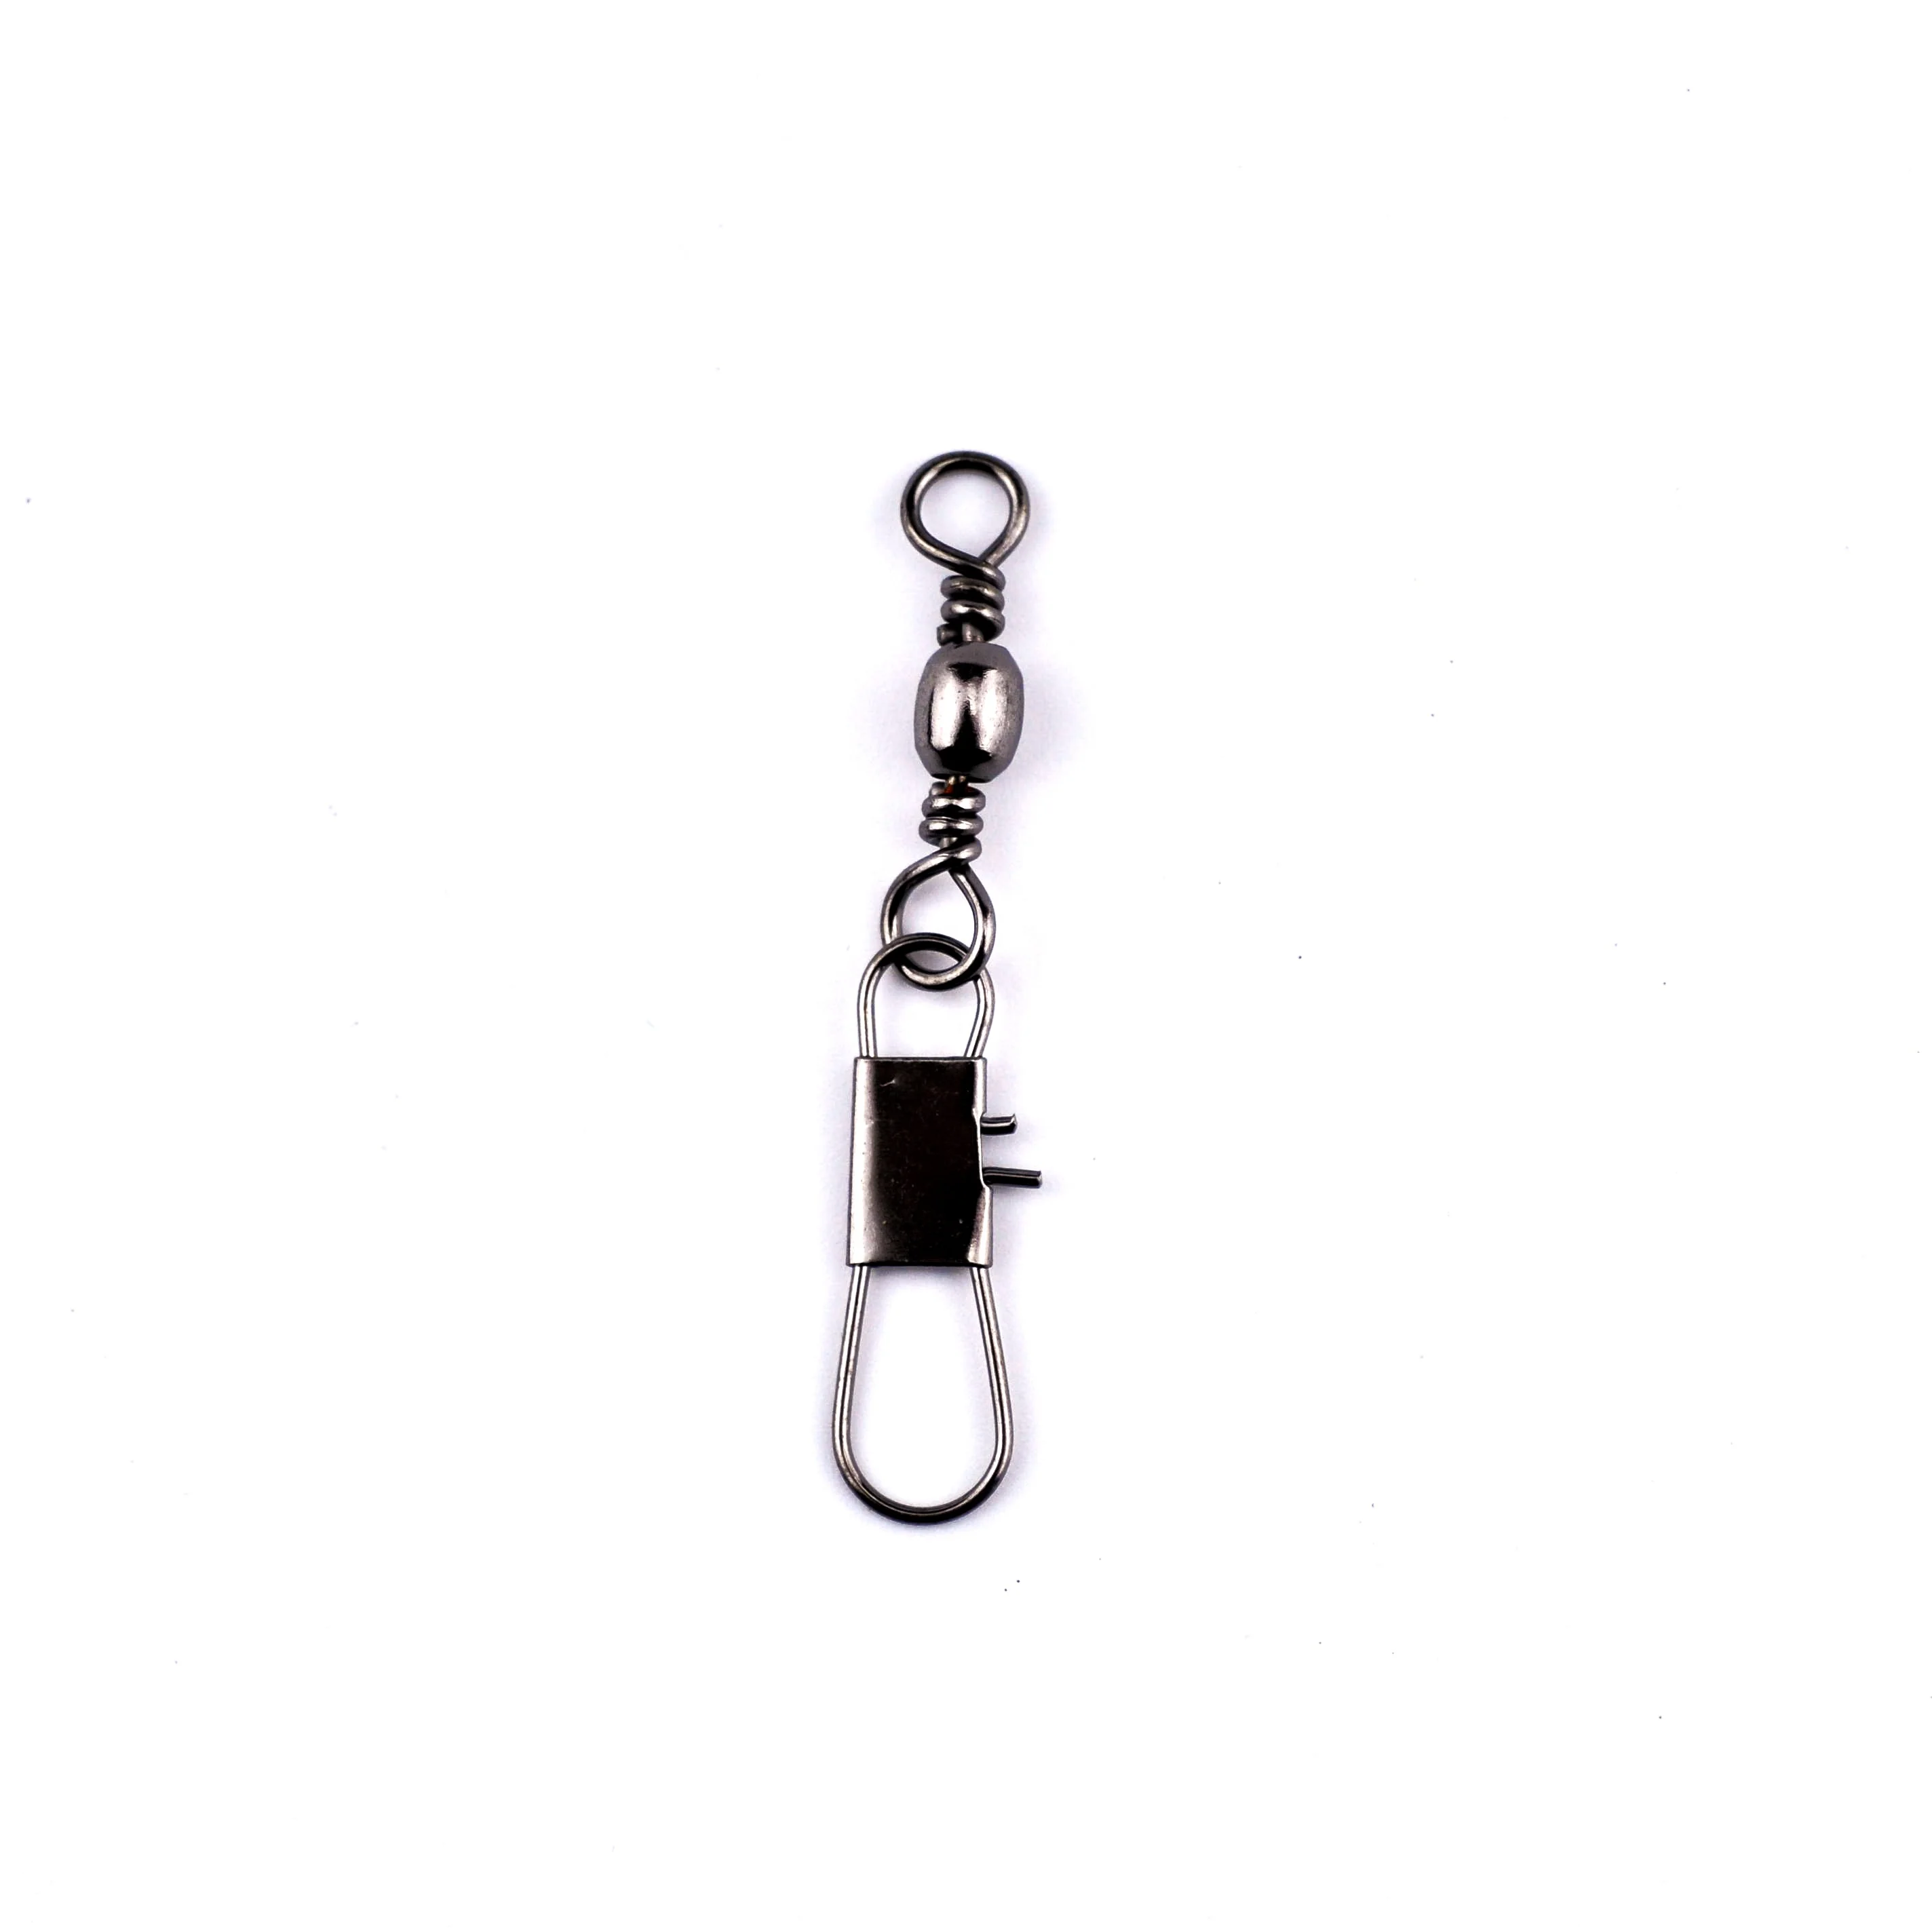 

High-Quality Barrel Swivel with Interlock-Snap #Fishing Tackle #Fishing Swivel #Fishing Connector Accessories